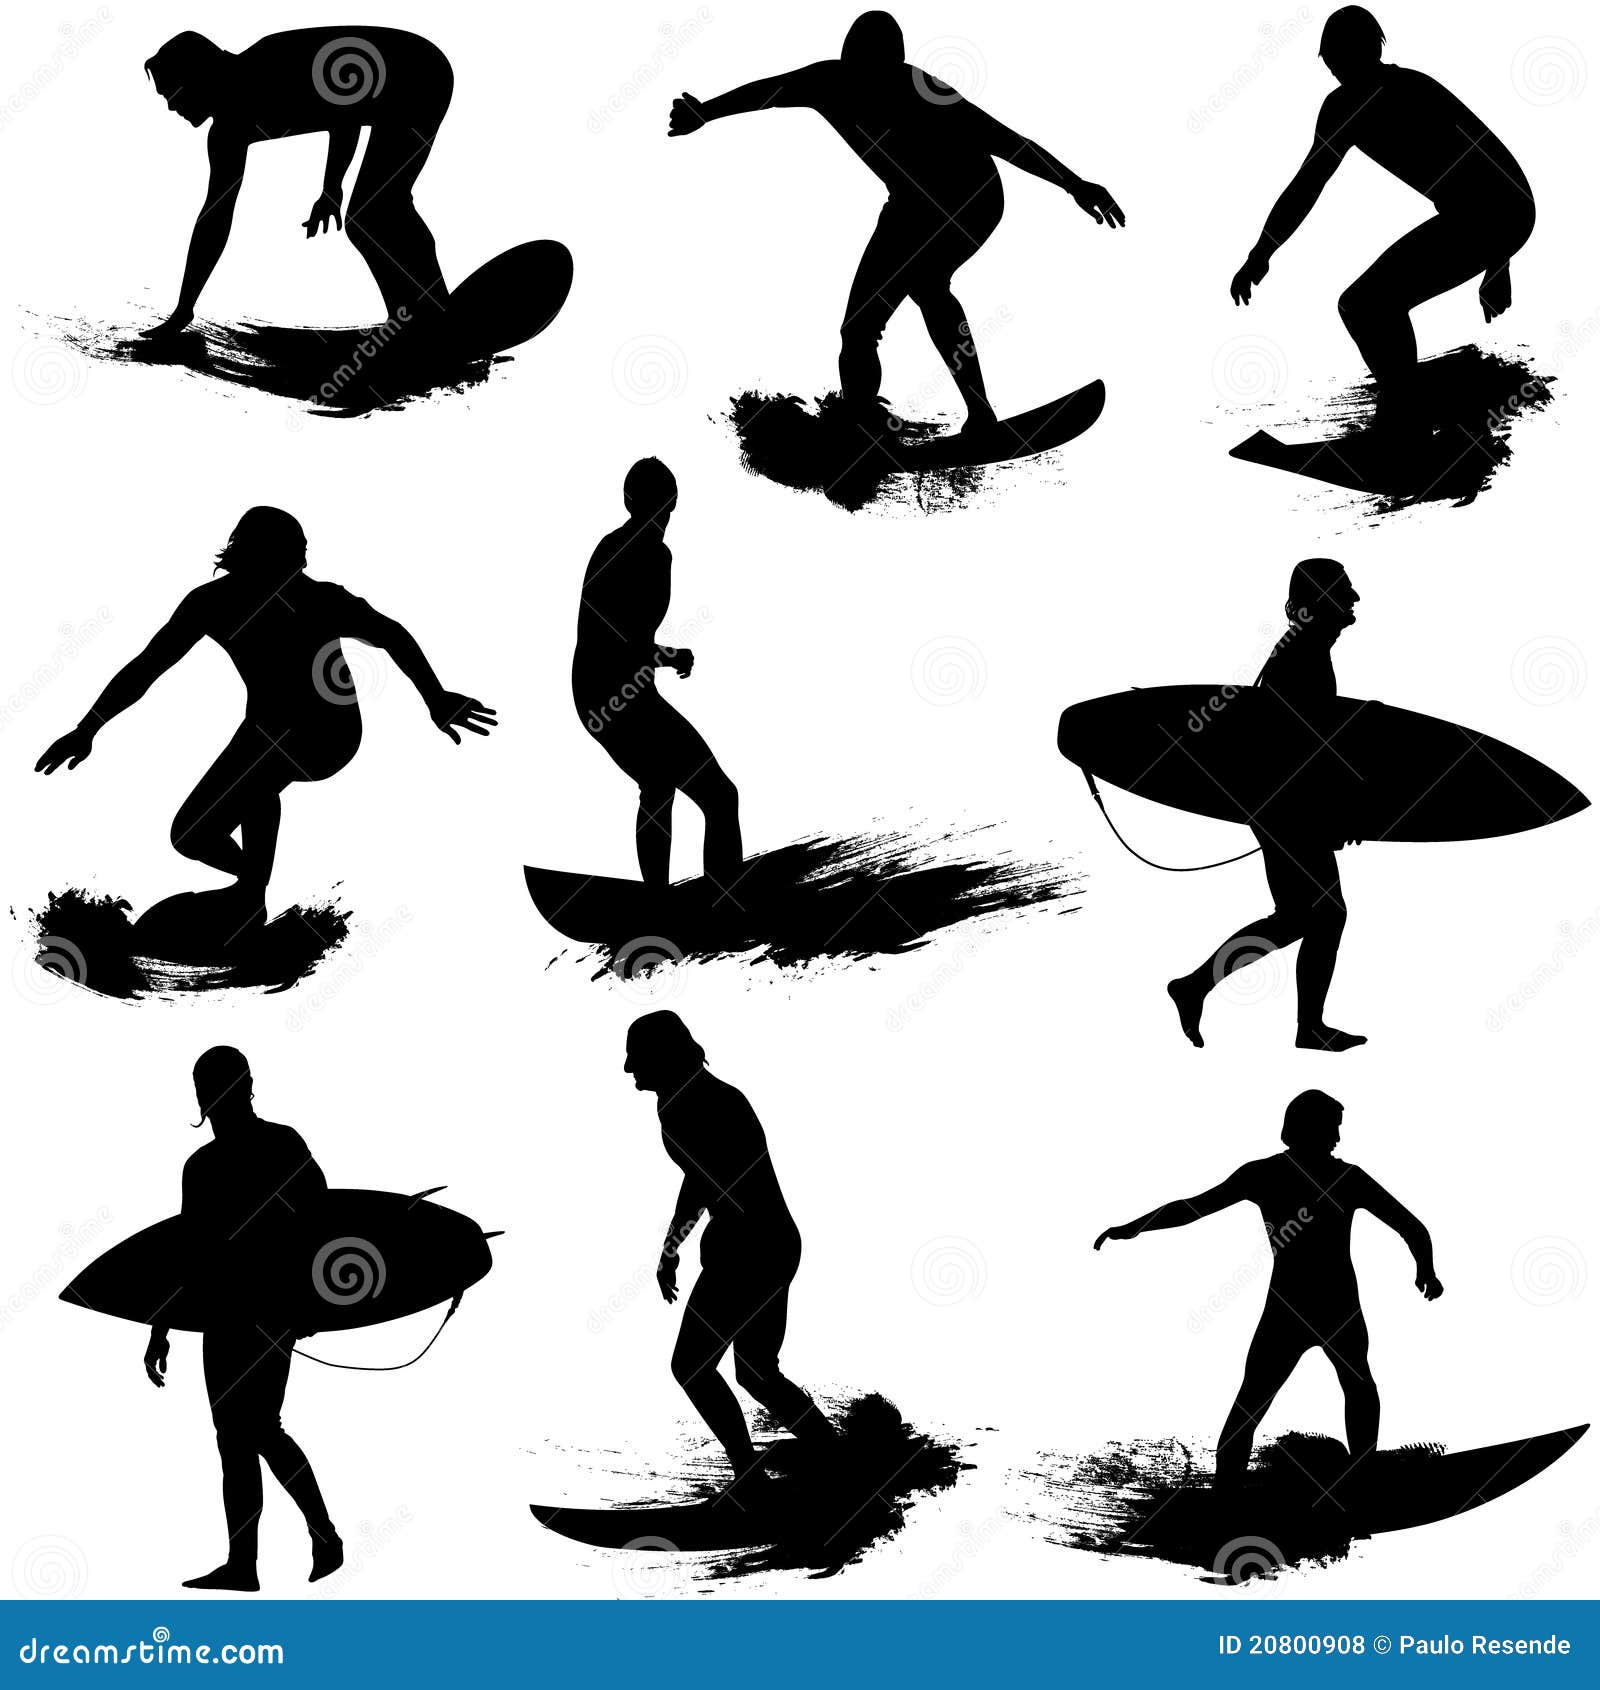 surf silhouettes